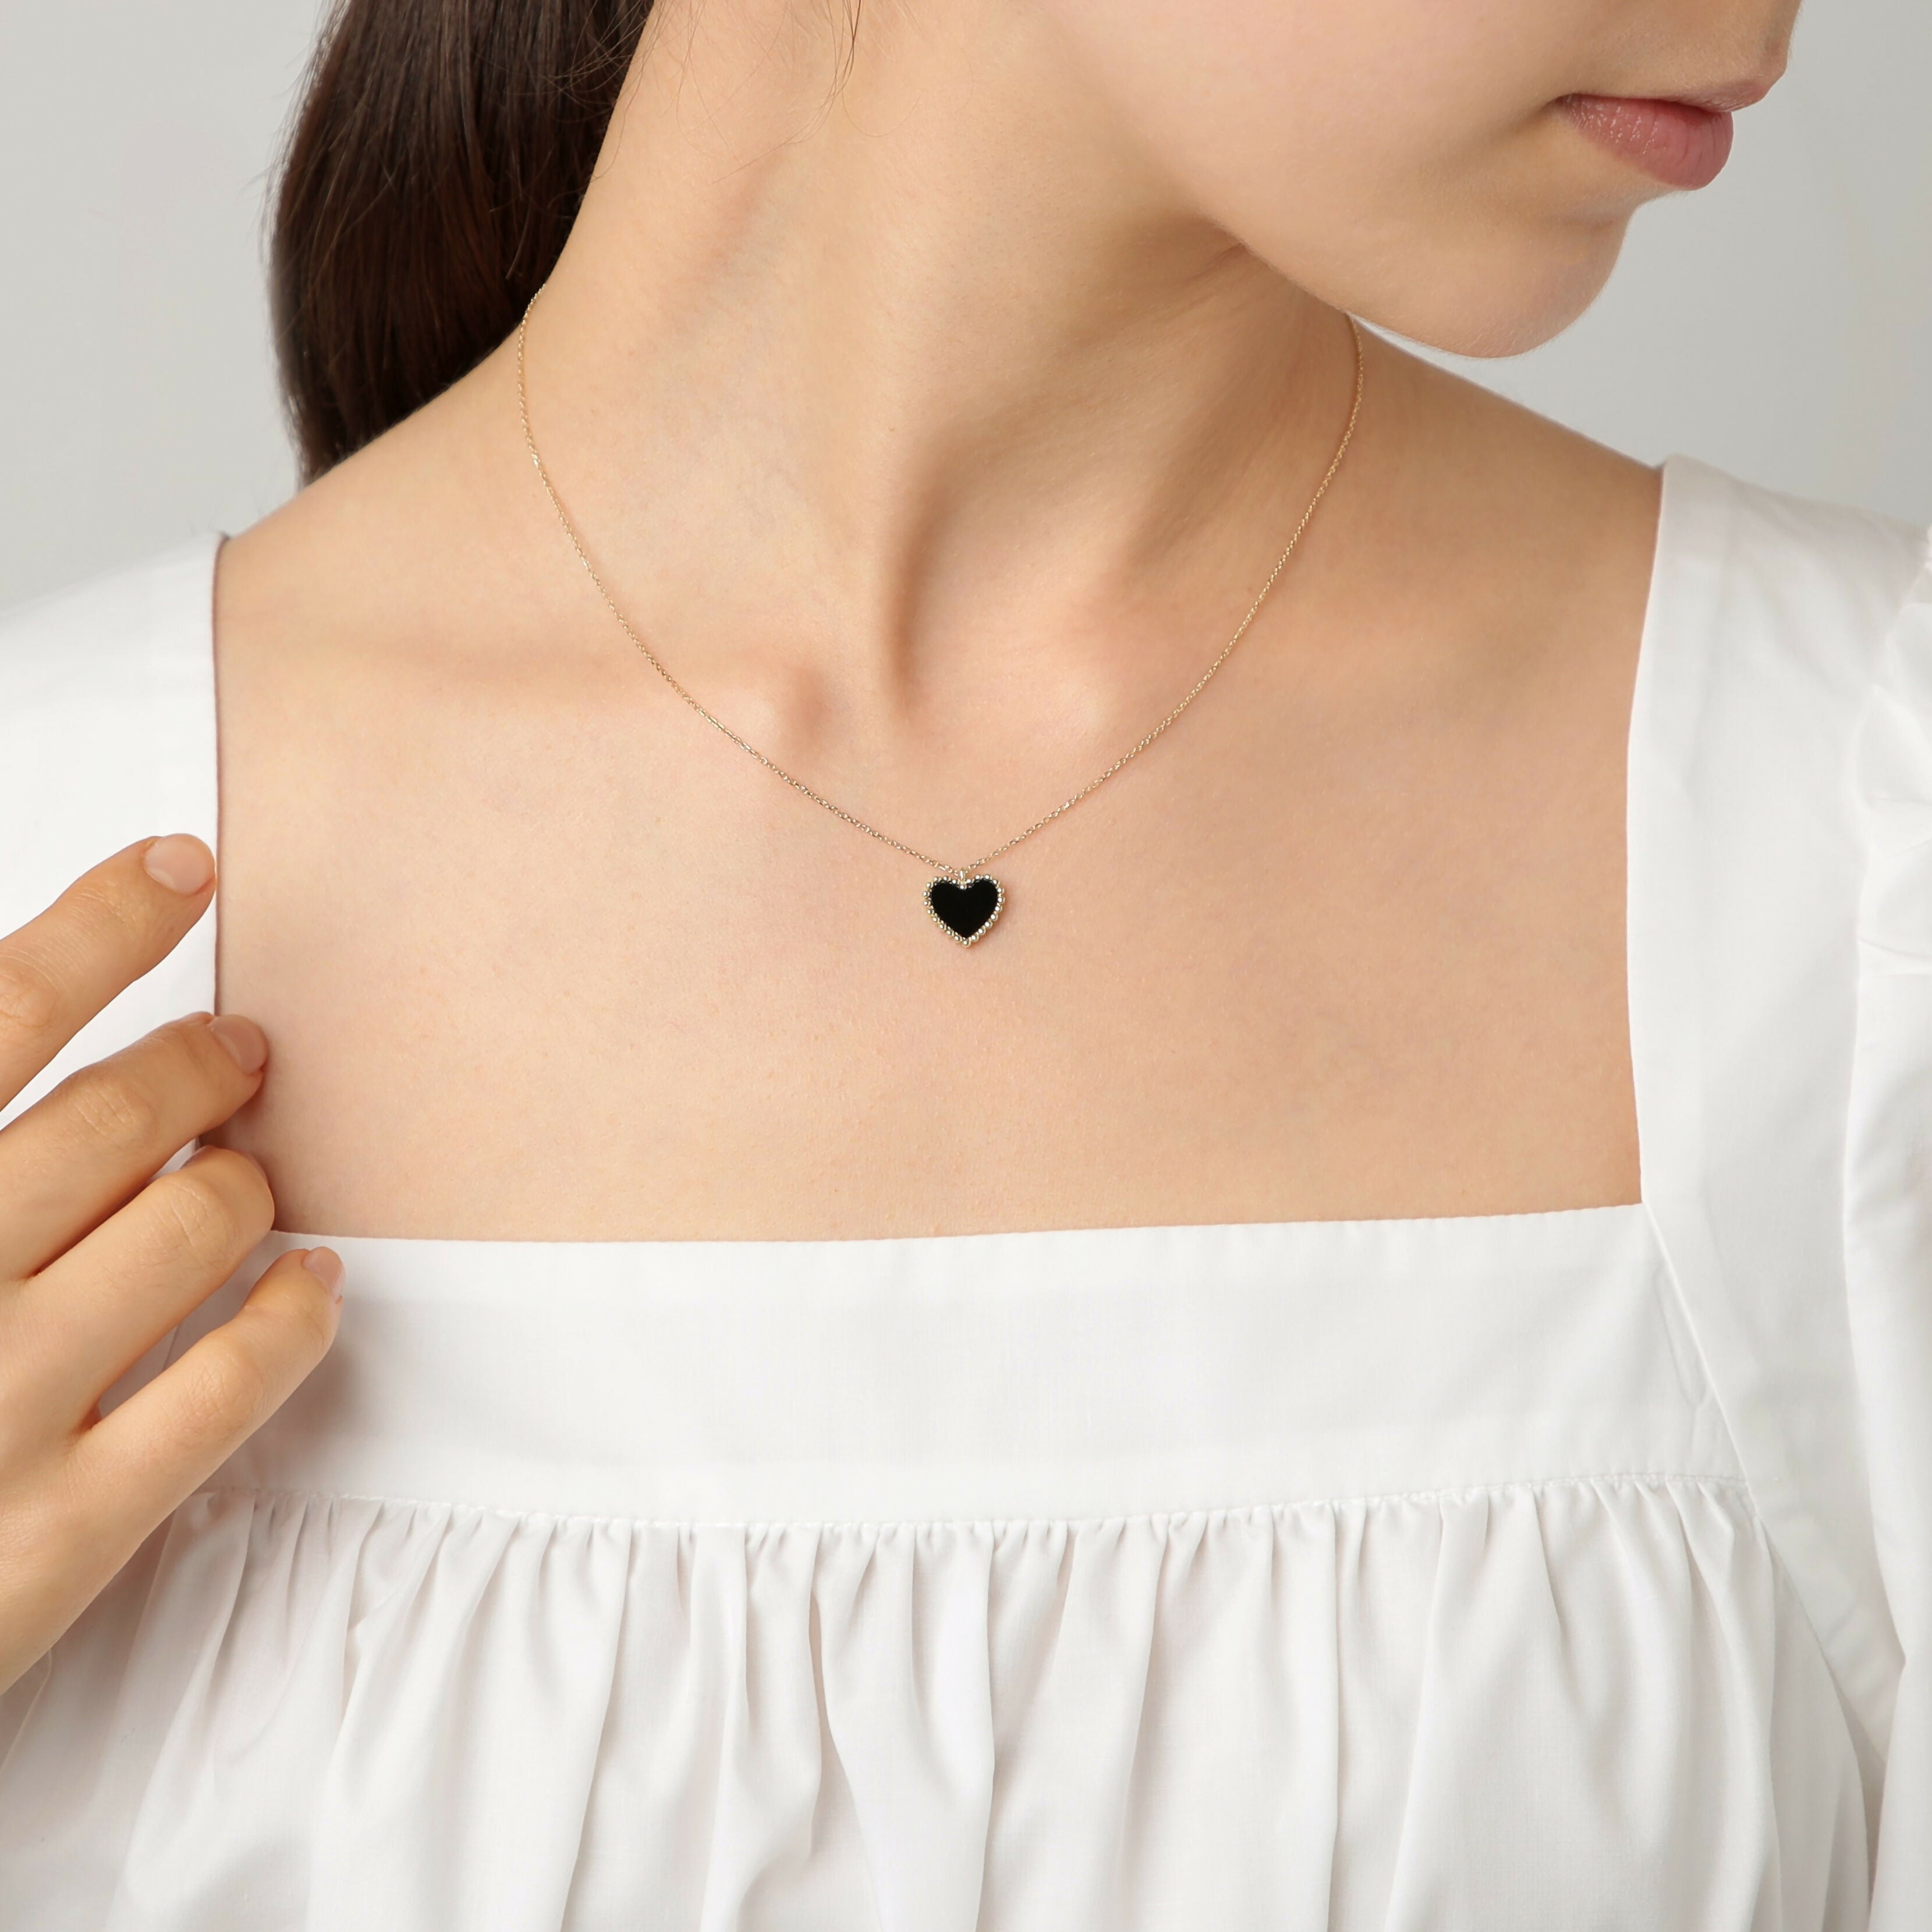 K10 オニキス ハート ネックレス / 10K Onyx Heart Necklace